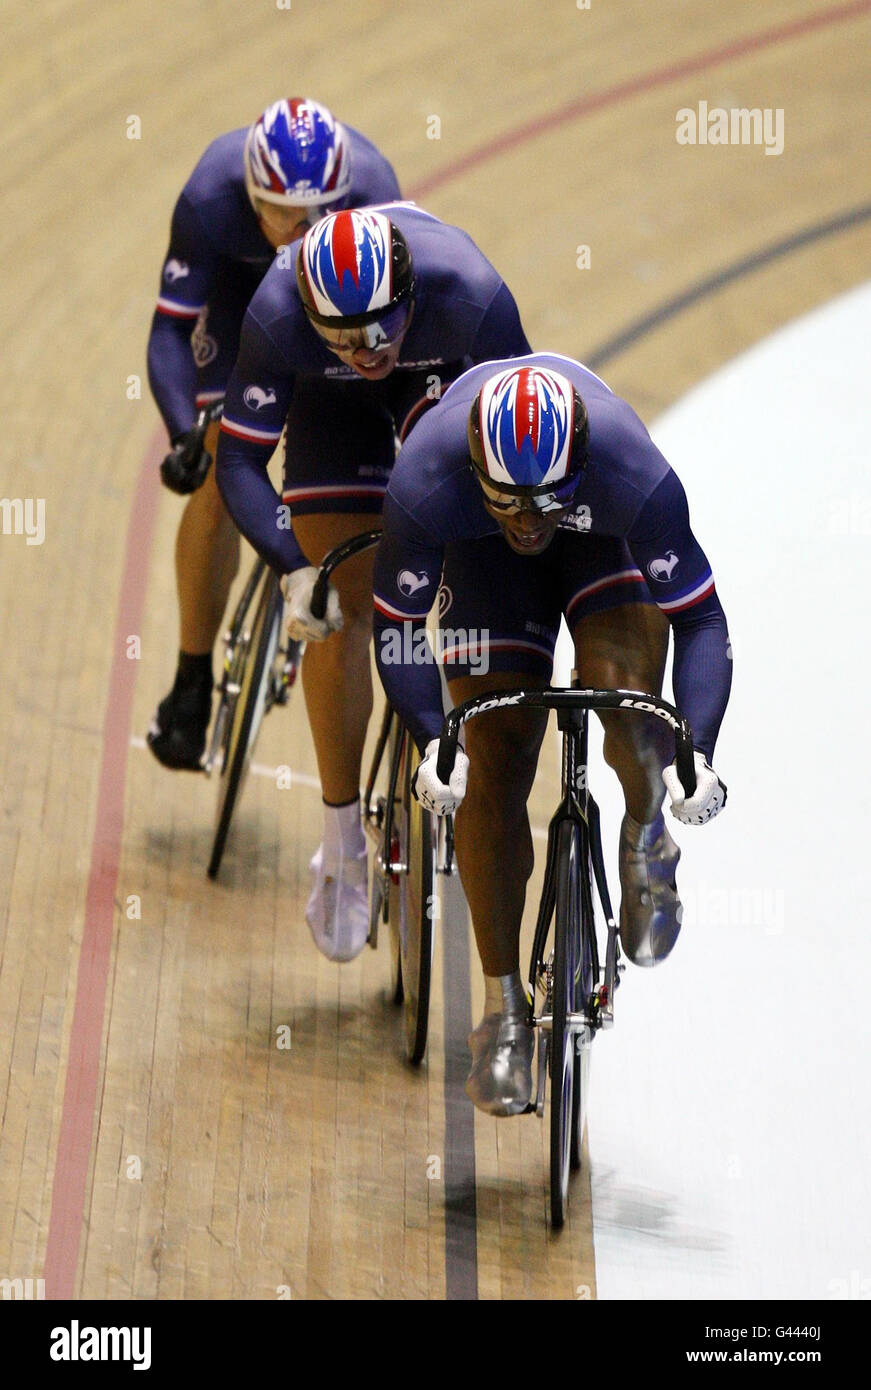 French Men's Team Sprinter Gregory Bauge, Michael D'Almeida and Kevin Sireau in Qualifying during the Track World Cup at the National Cycling Centre, Manchester. Stock Photo